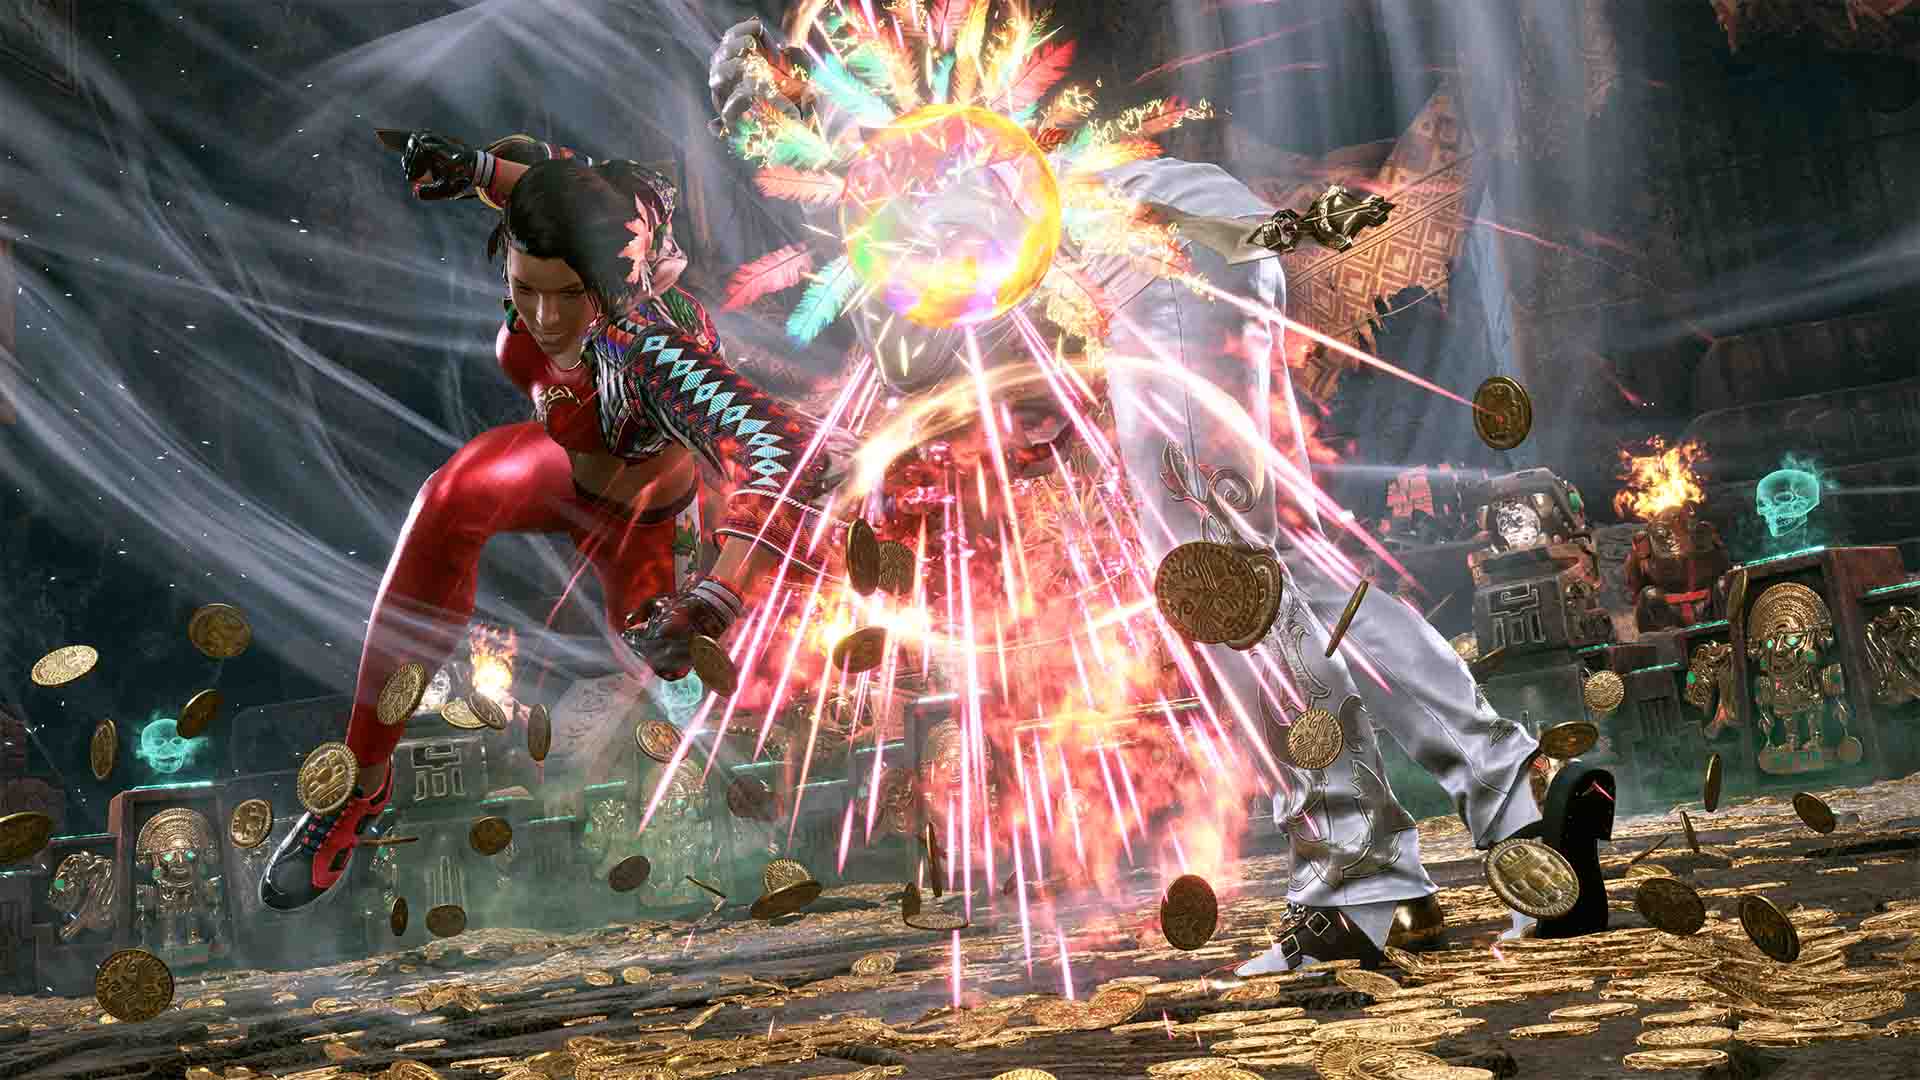 Tekken 8 Unveils New Trailer, Will be Available for PS5, Xbox